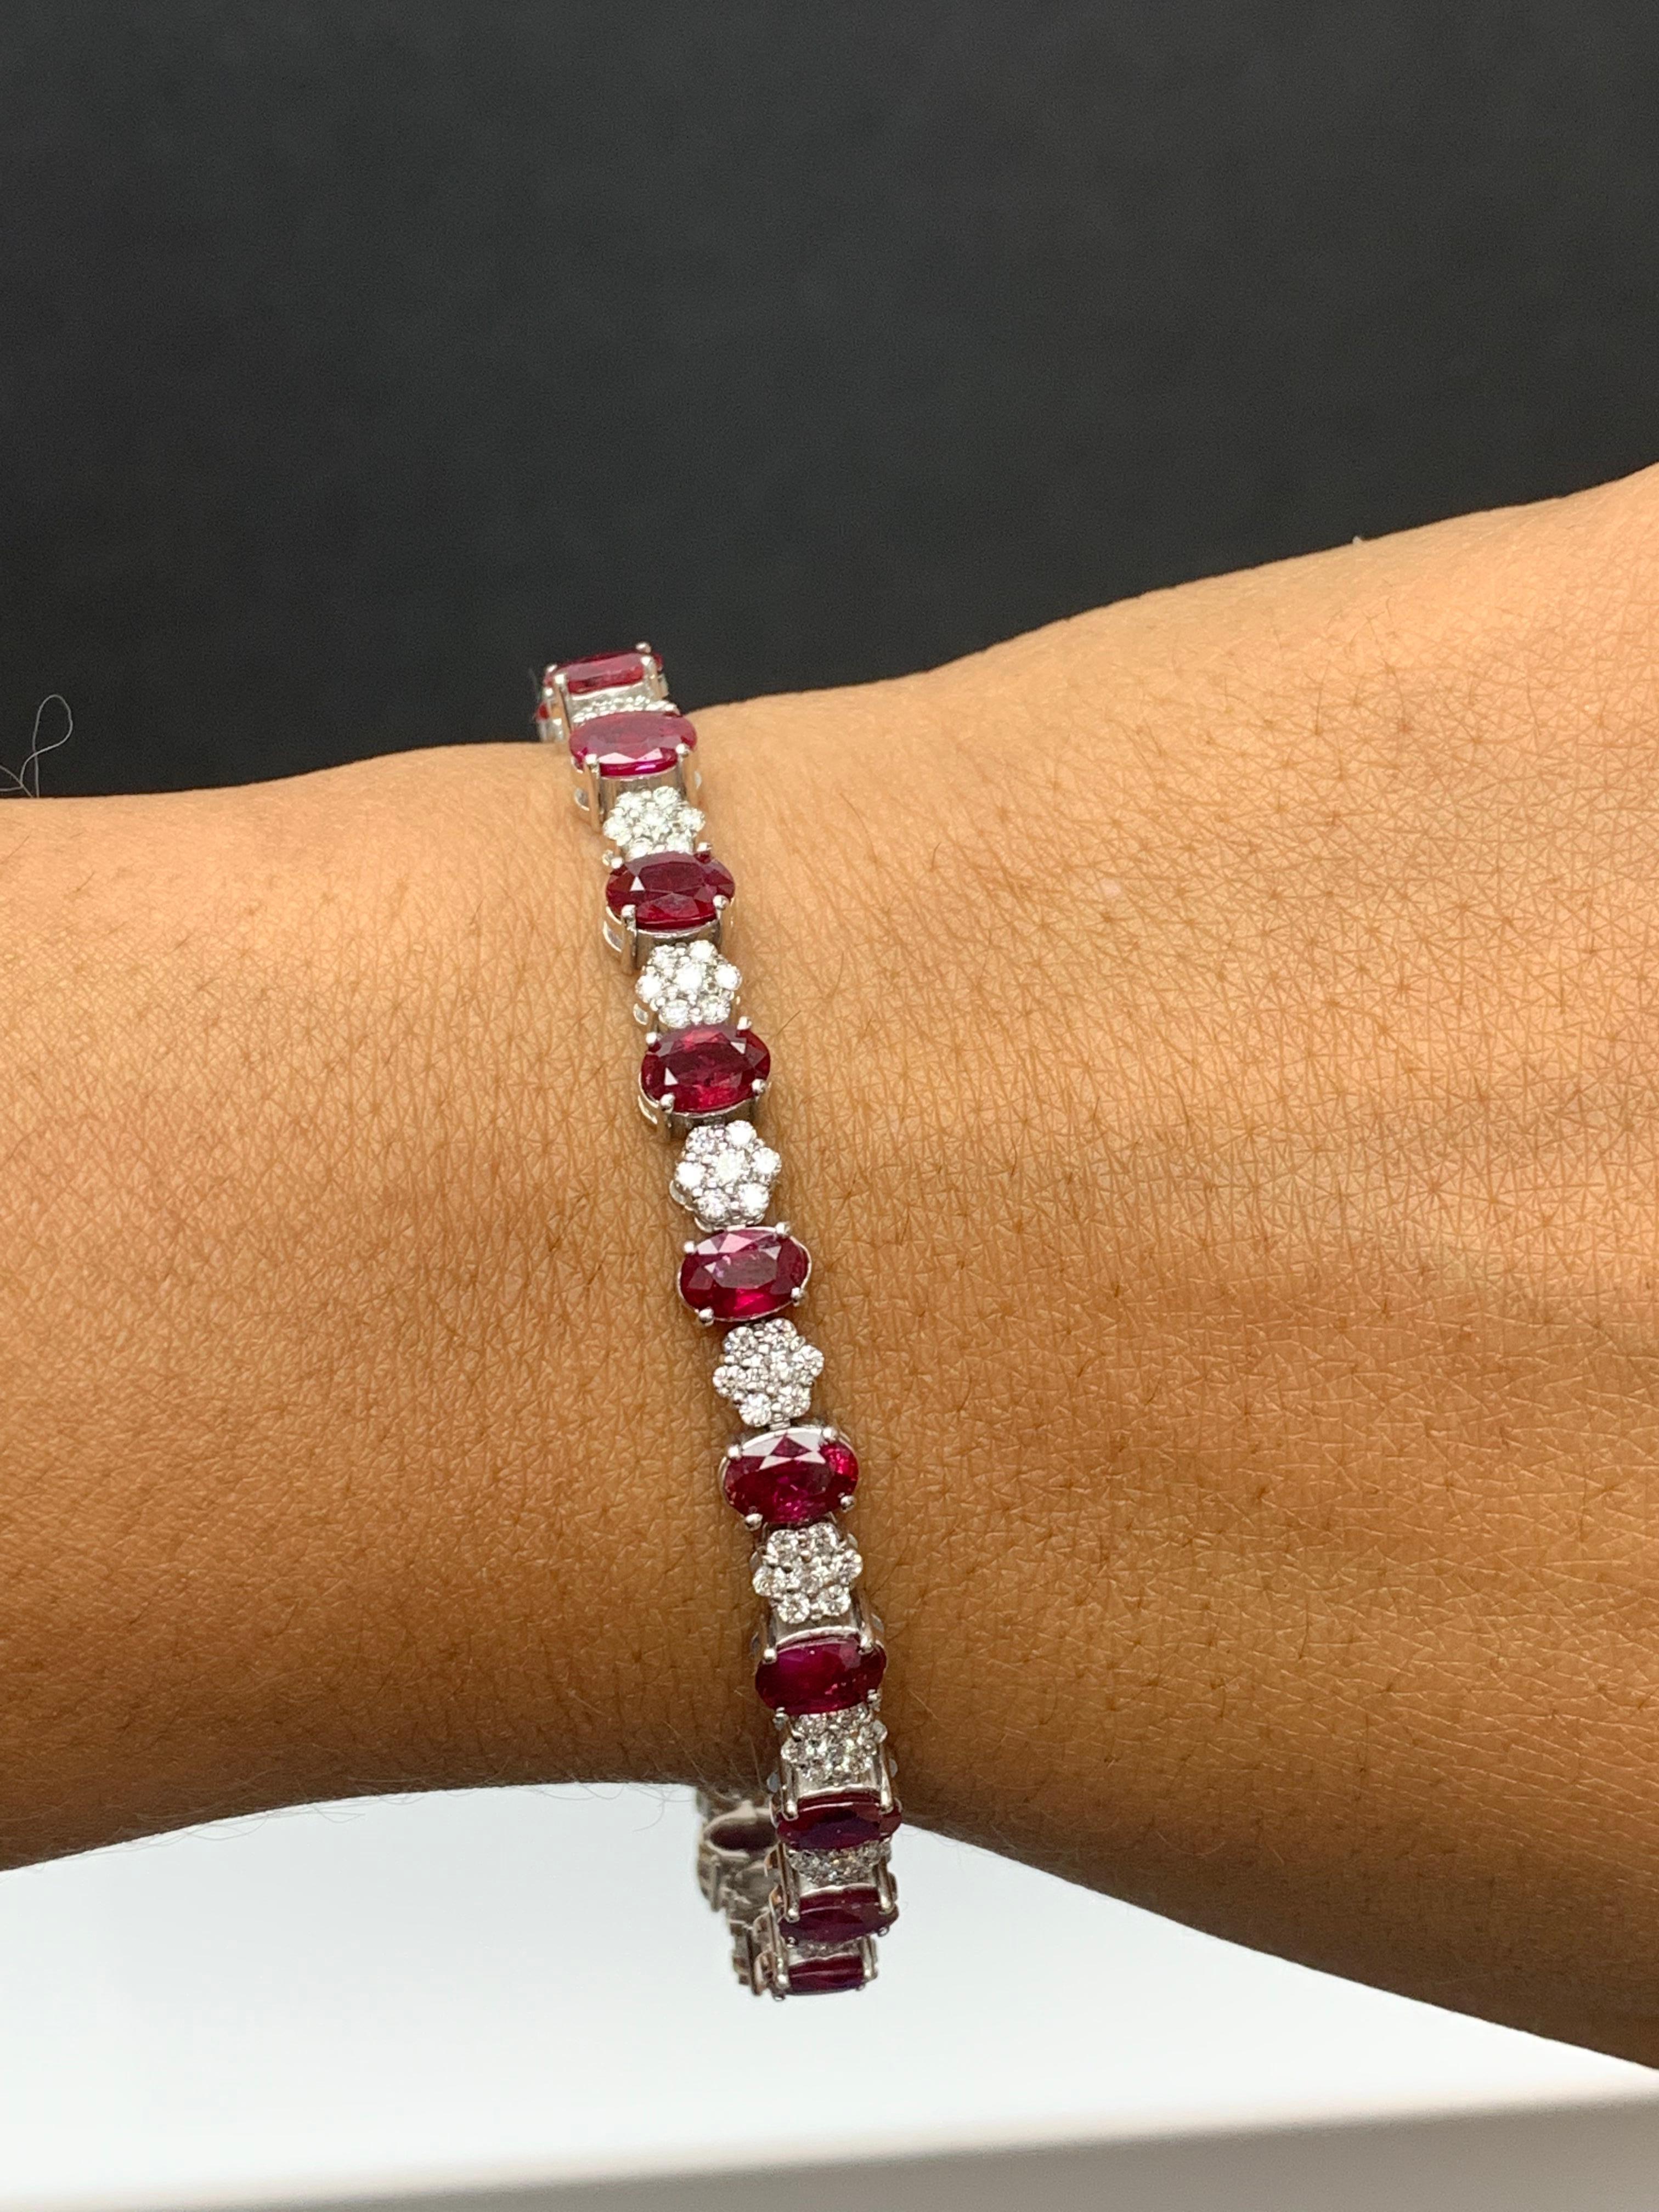 10.34 Carat Oval Cut Ruby and Diamond Tennis Bracelet in 14K White Gold For Sale 10